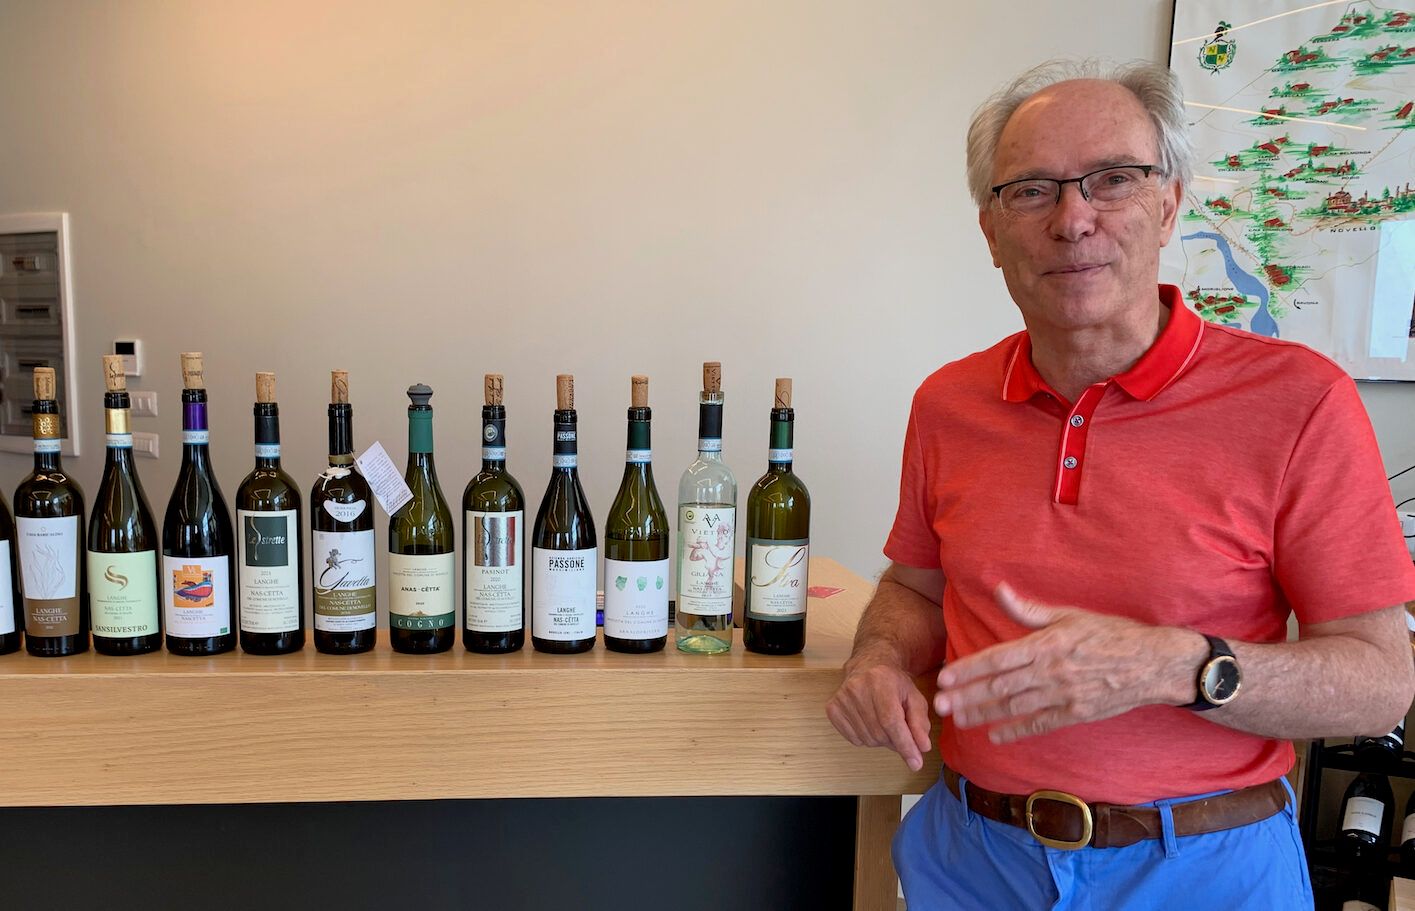 David Way gives us the inside track on The Wines of Piemonte